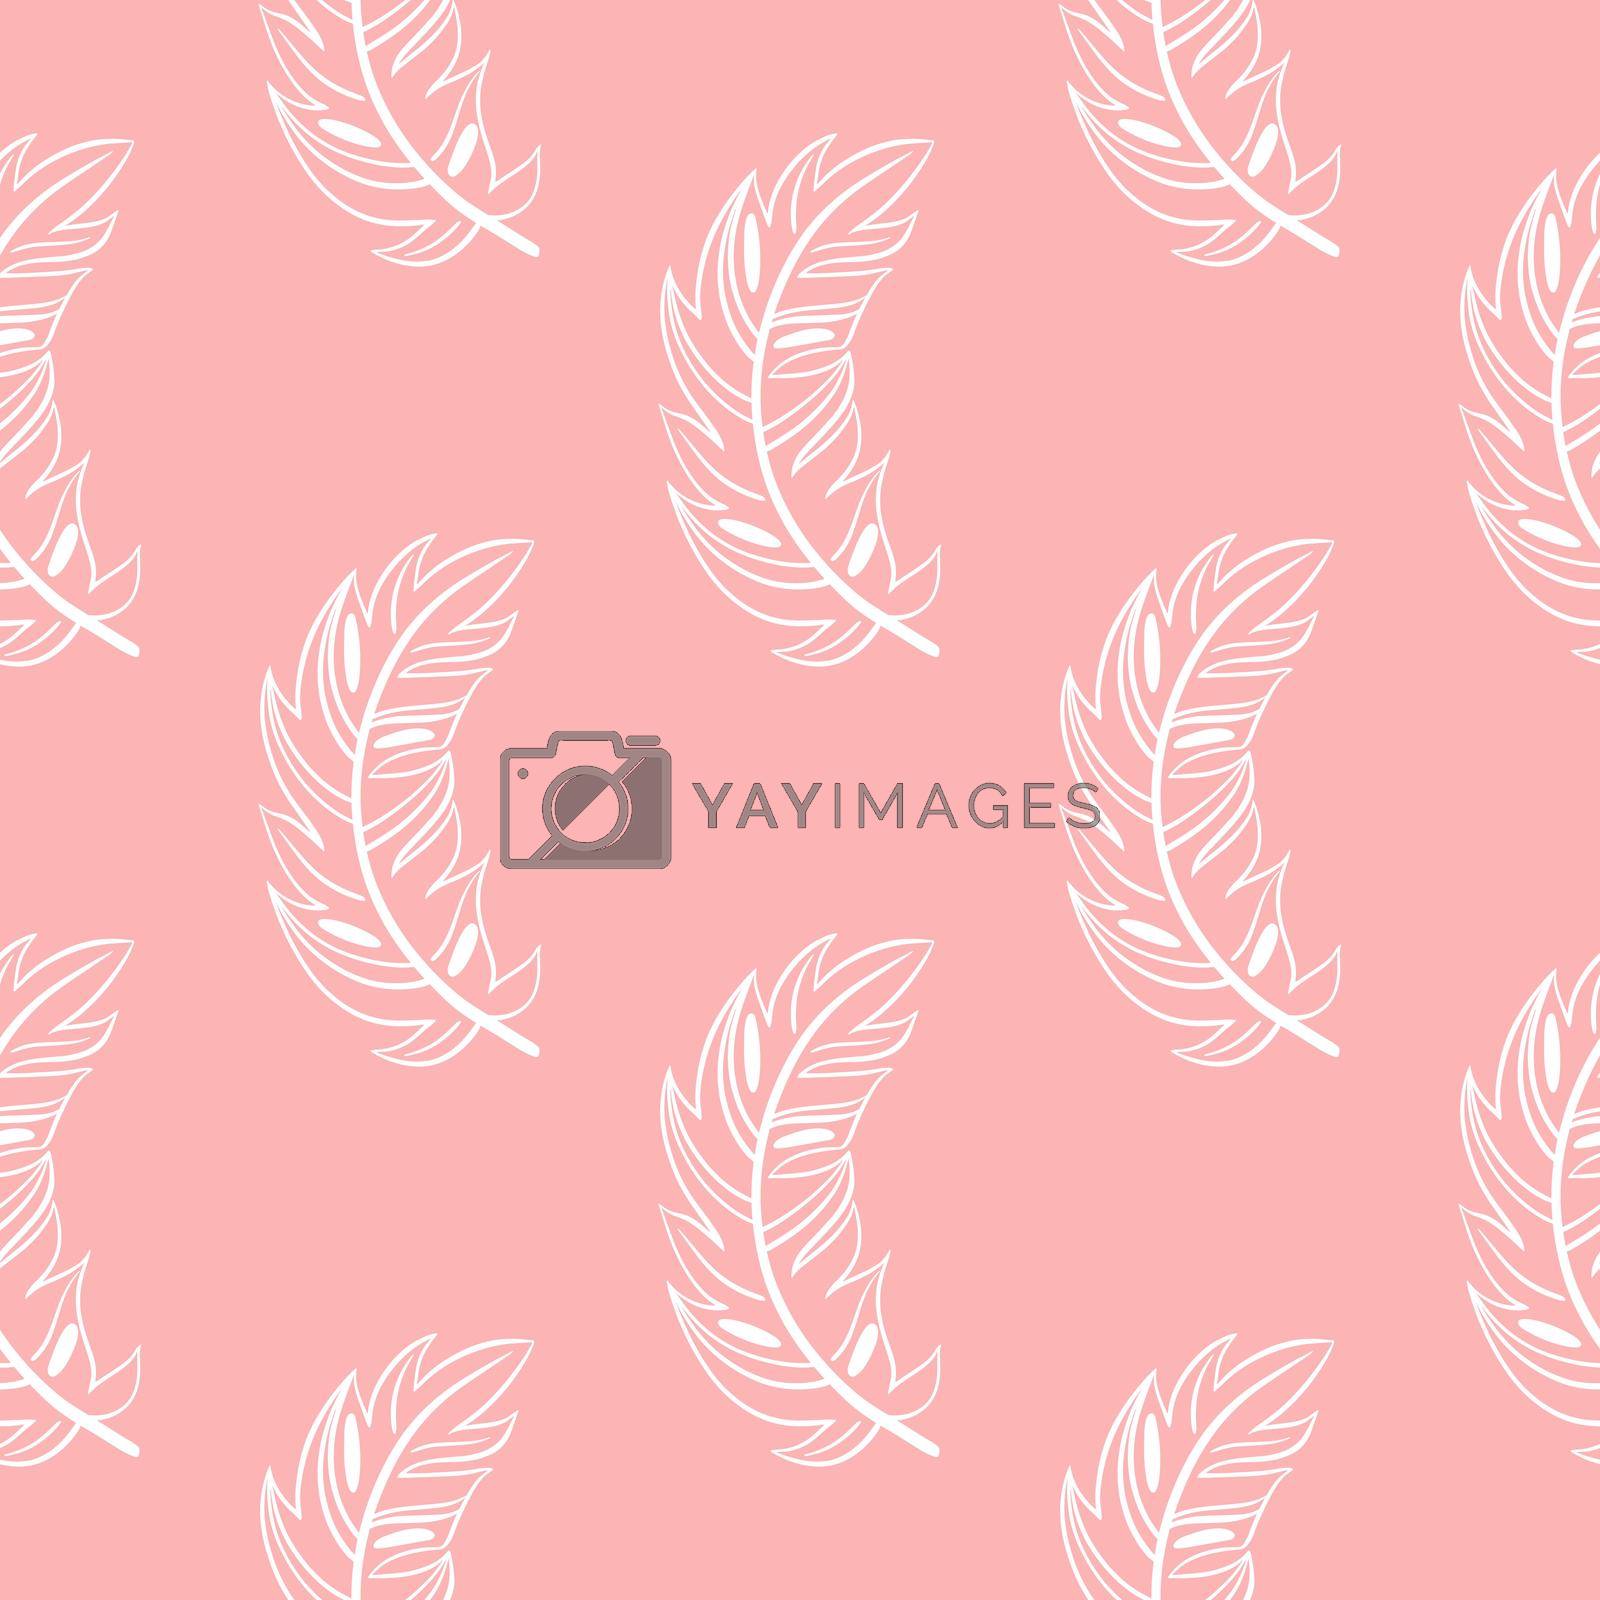 Royalty free image of Feathers vintage seamless pattern by TassiaK